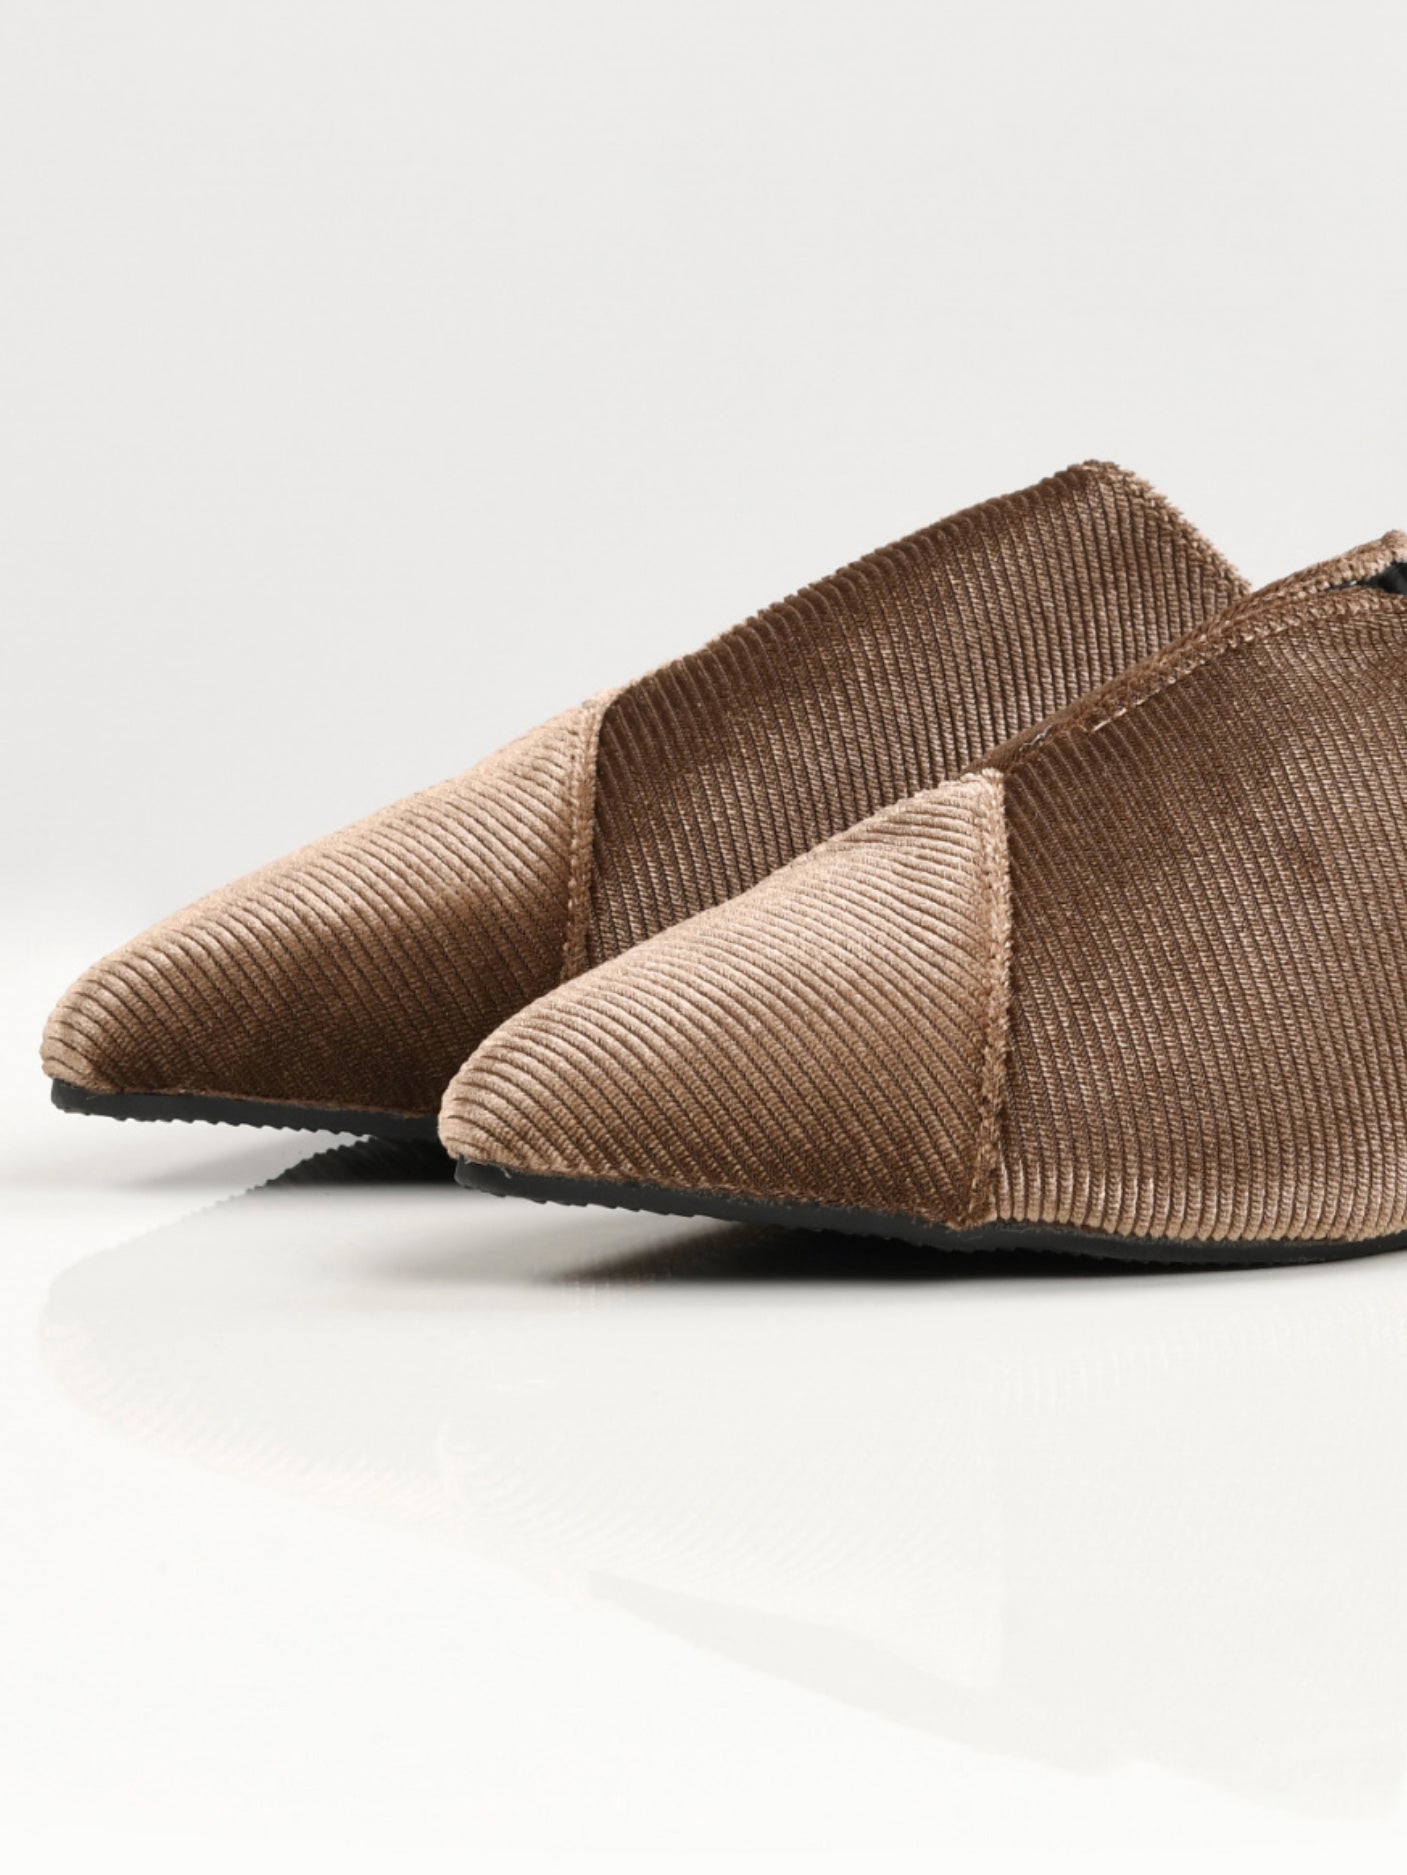 Stripe Textured Shoes - Brown